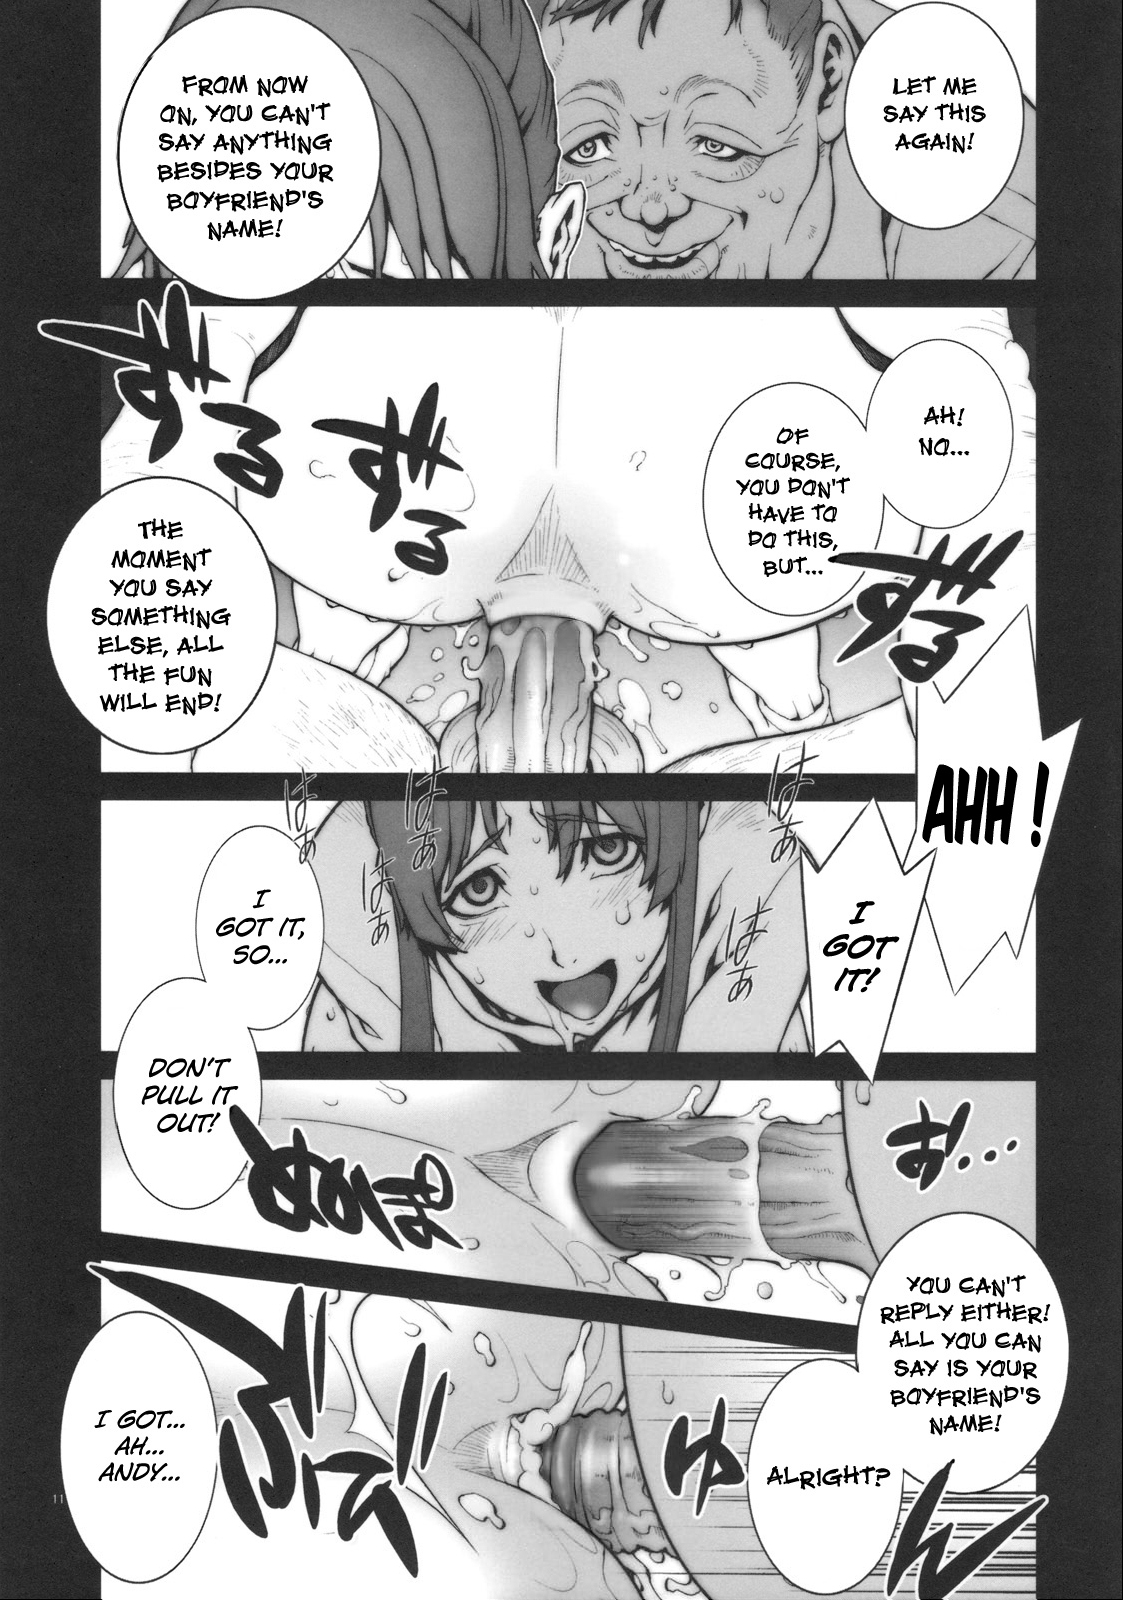 (COMIC1☆4) [P-collection (Nori-Haru)] Kachousen (King of Fighters) [English] [Funeral of Smiles] [Decensored] page 12 full